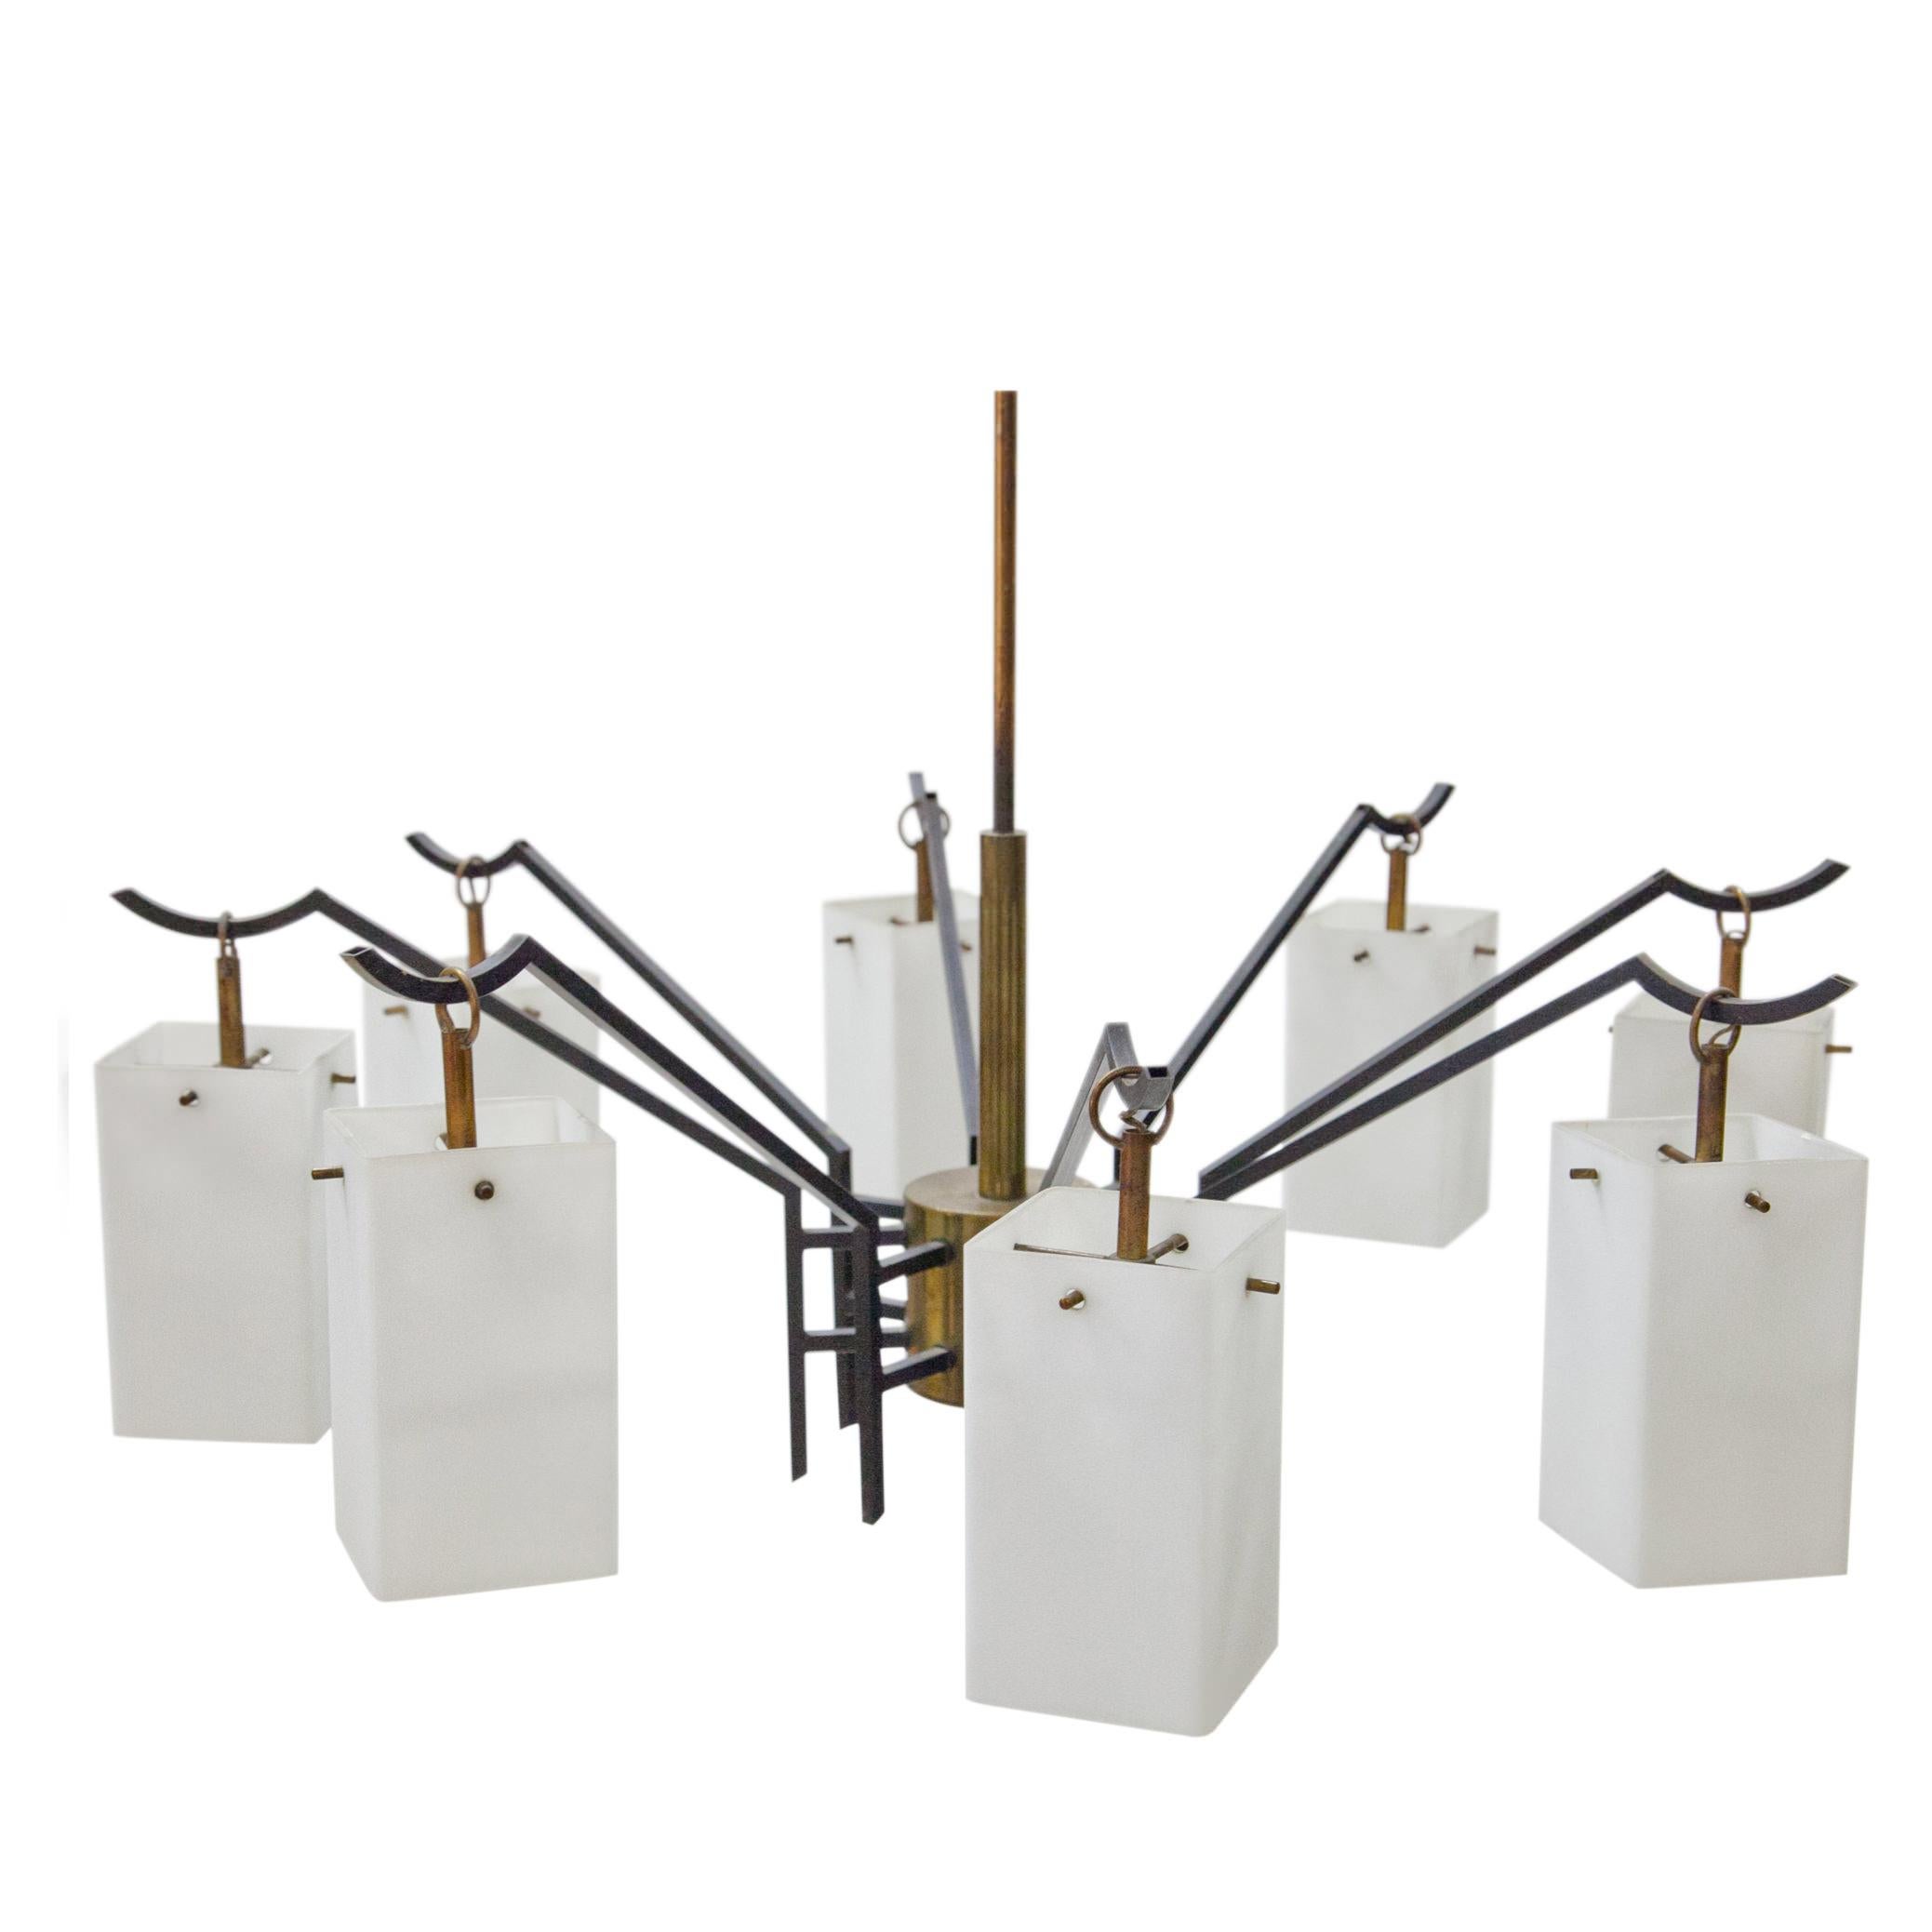 8-armed chandelier in brass and iron with rectangular opaque glass shades by Stilnovo, Italy, mid-20th century. 

For the electrification we assume no liability and no warranty.